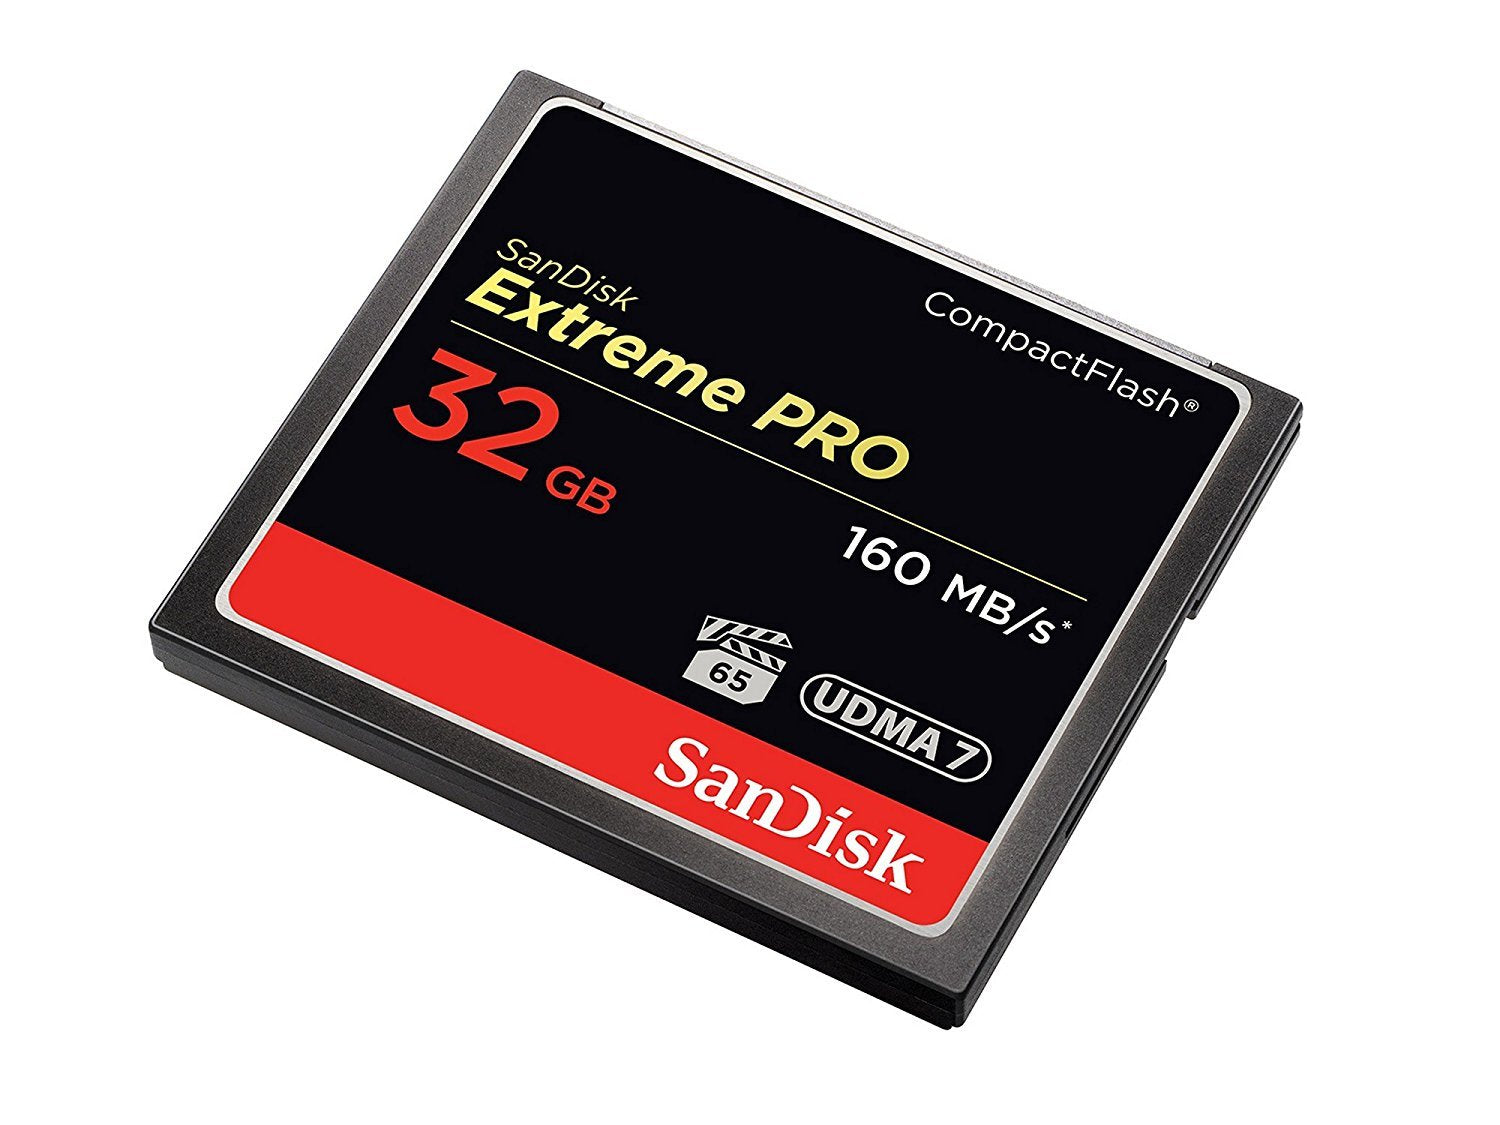 SanDisk Extreme PRO 32GB CompactFlash Memory Card UDMA 7 Speed Up To 160MB/s SDCFXPS-032G-X46 (OPEN BOX, LIKE NEW)